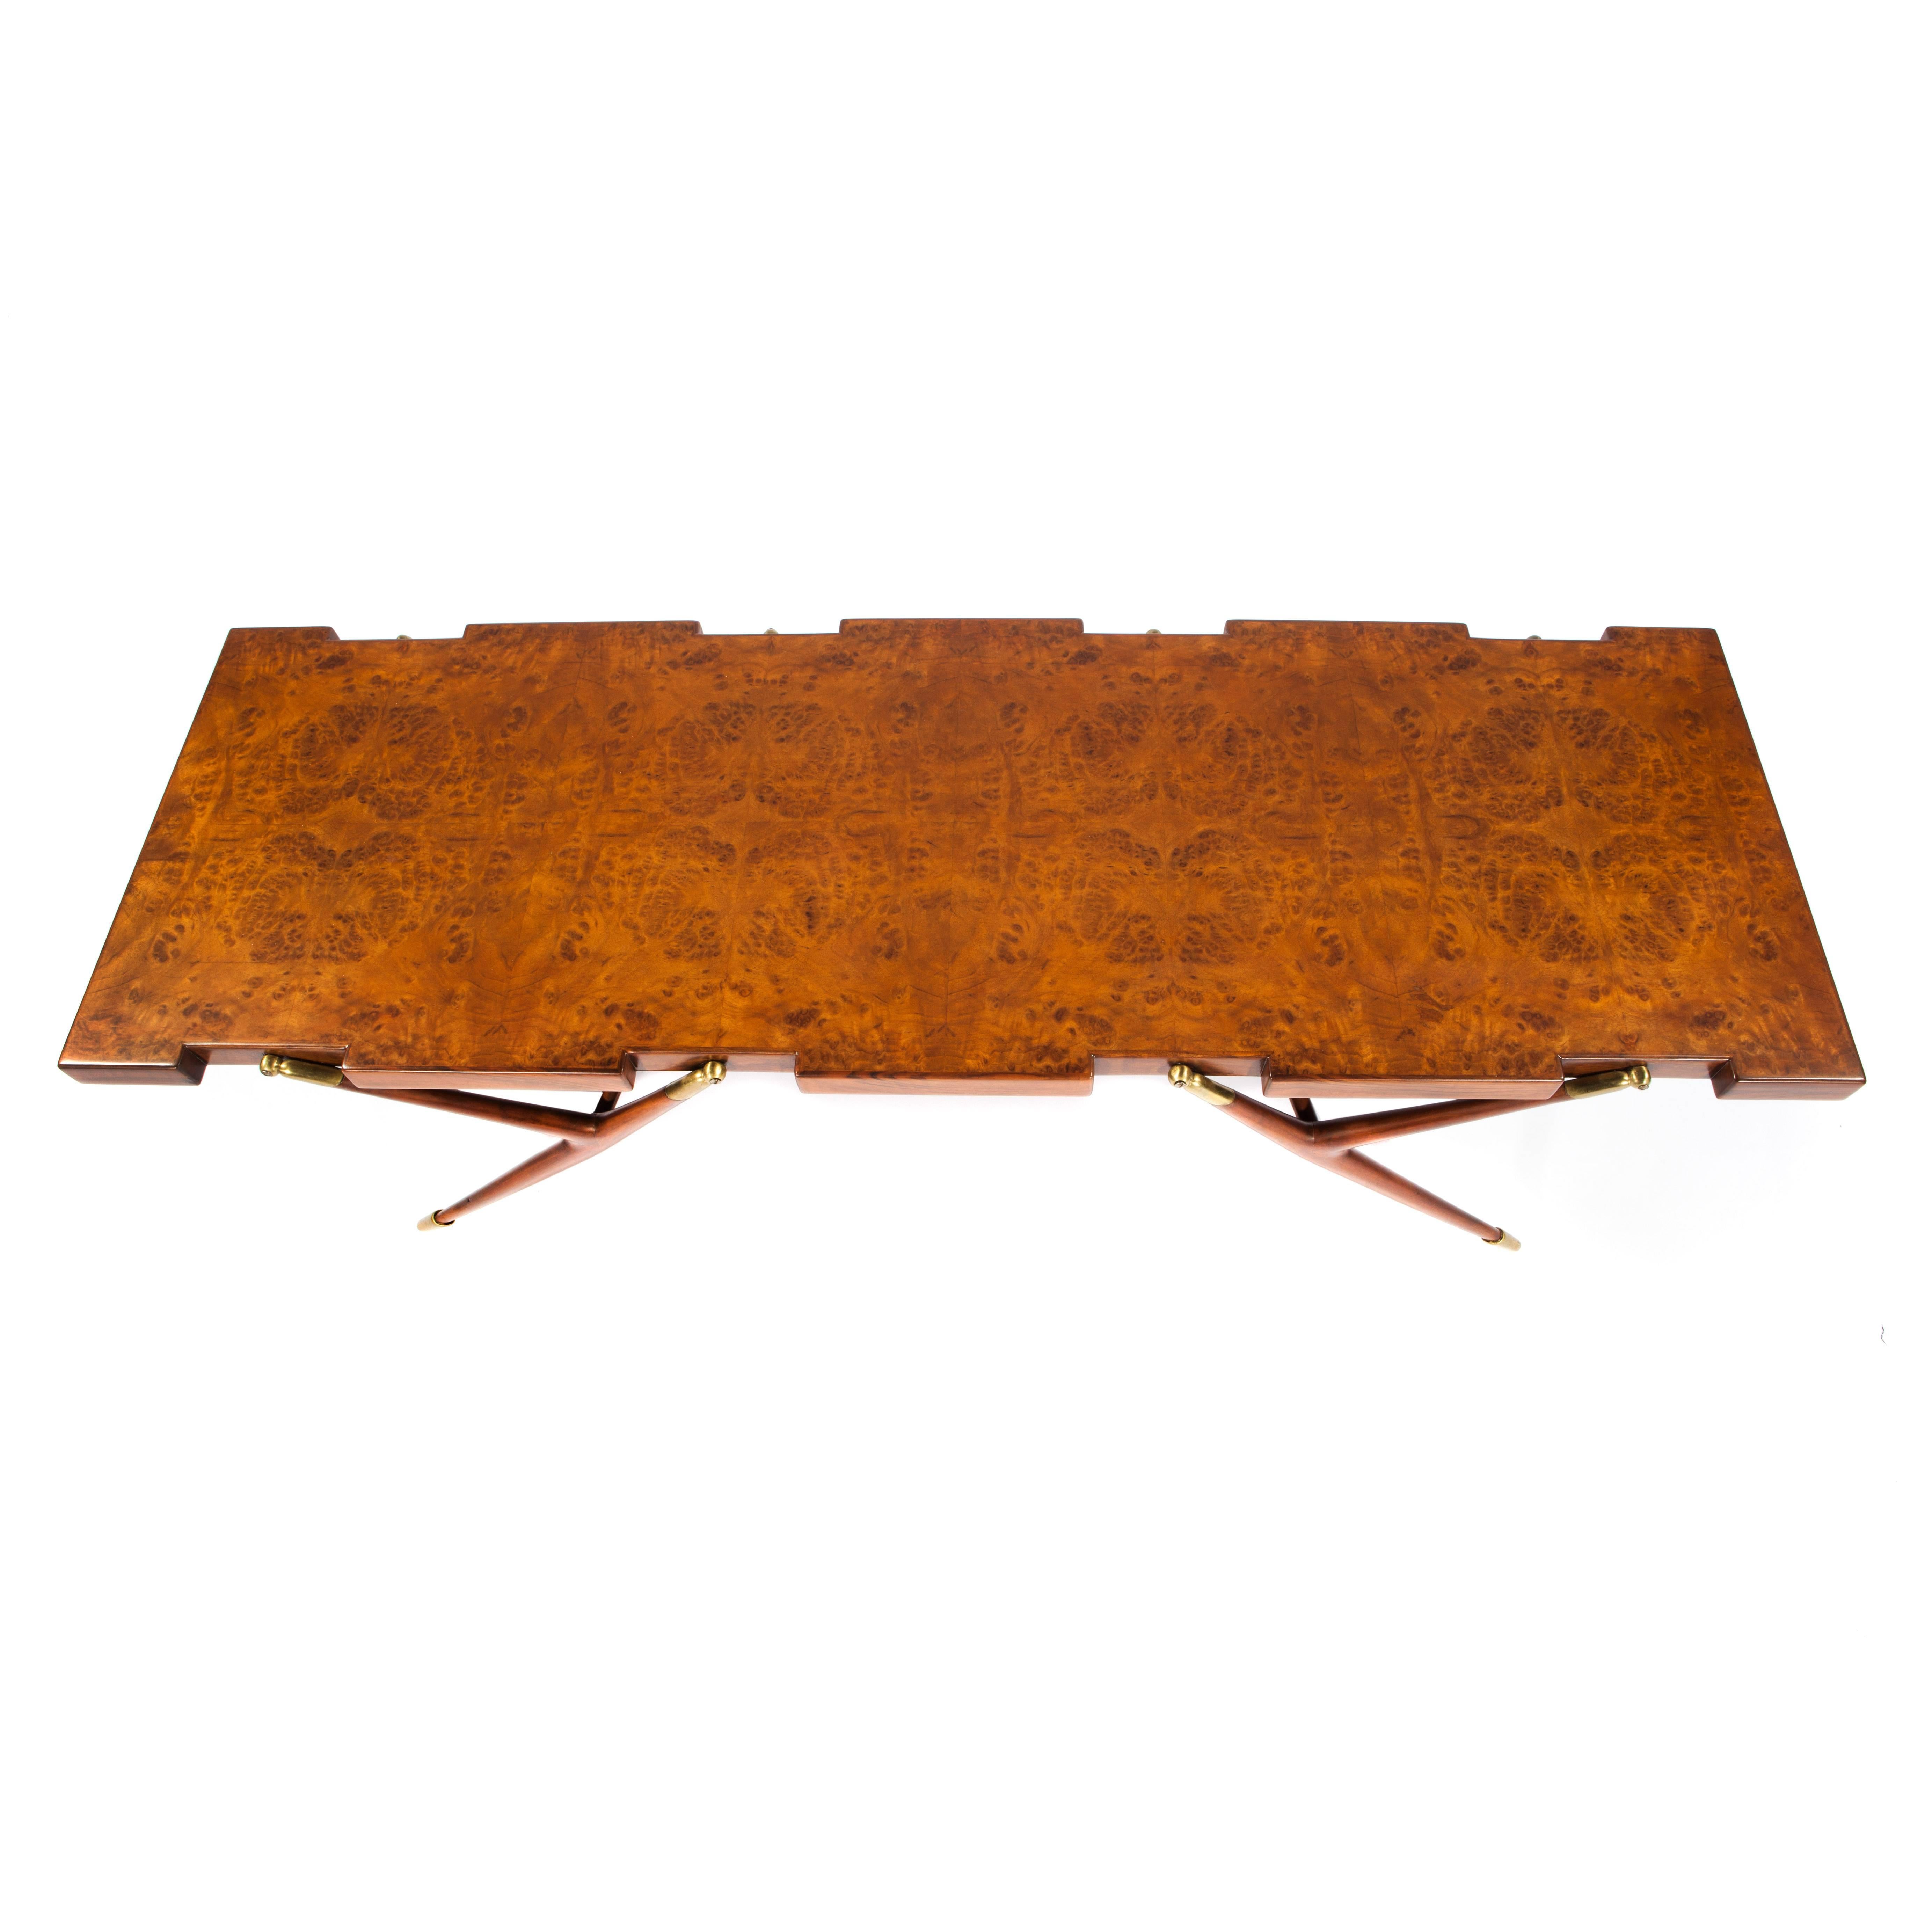 The best of Mid-Century Italian design is reflected in this rare and iconic Ico Parisi coffee table. An excellent example with a gorgeous Italian burled walnut top notched to accommodate four y-shaped walnut legs with brass fittings and feet.